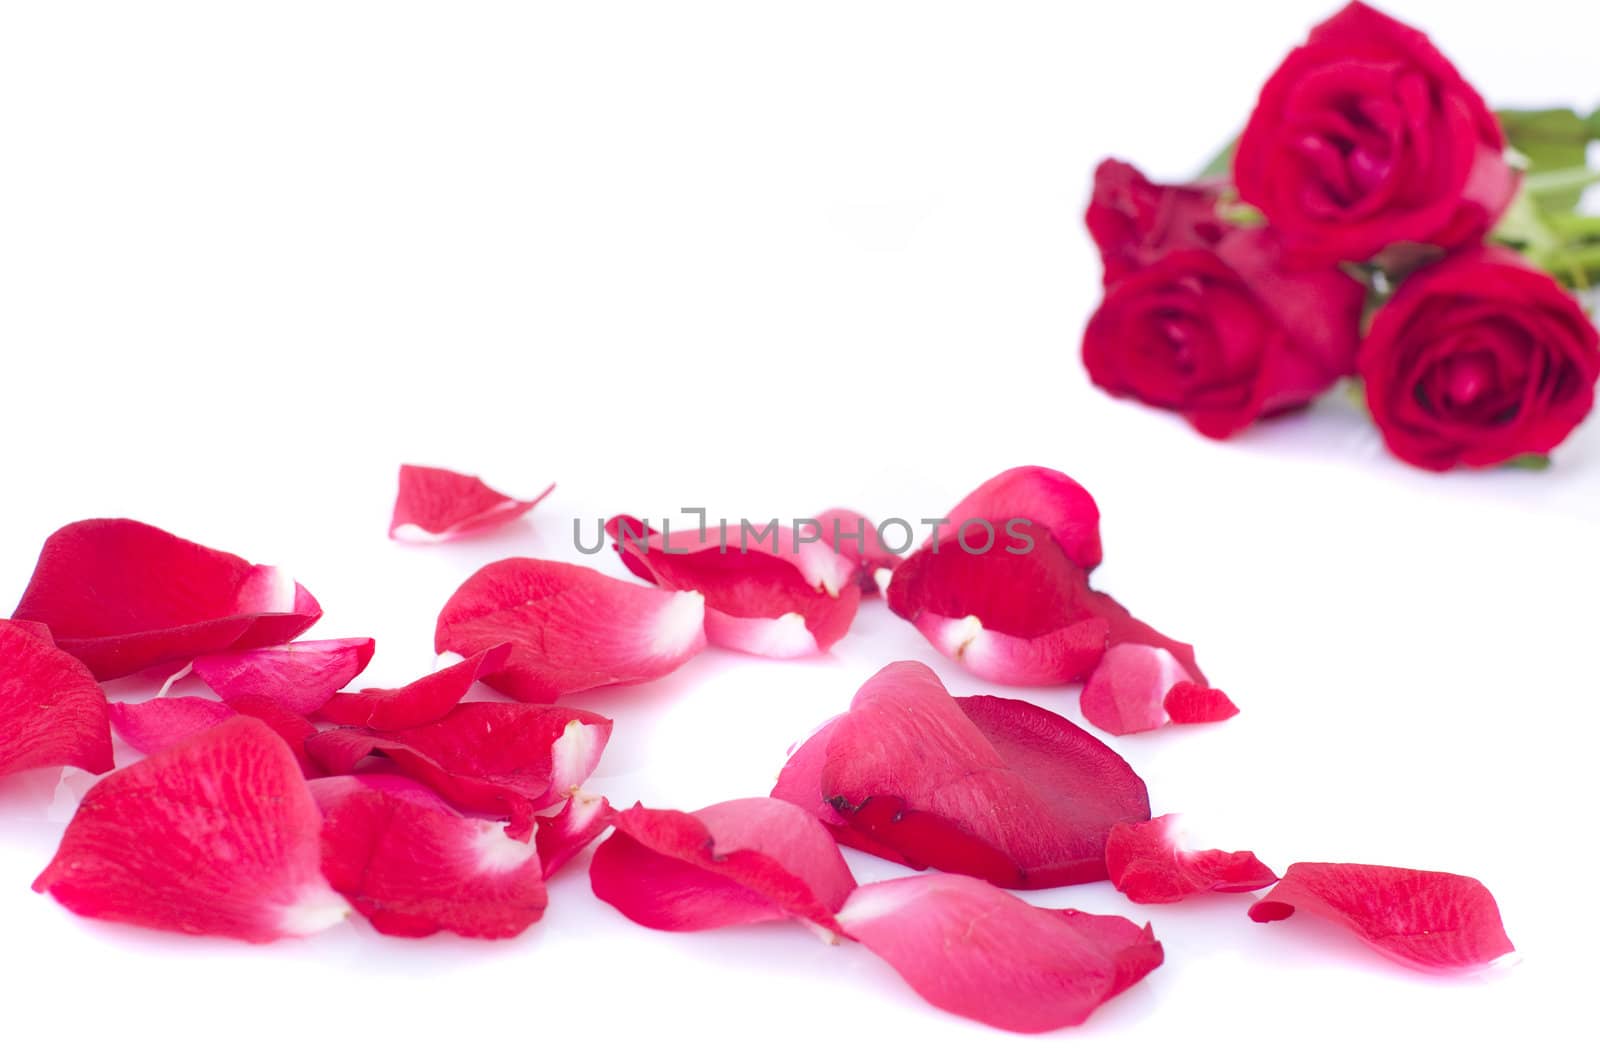 studio close up shot of red rose flower and petals 